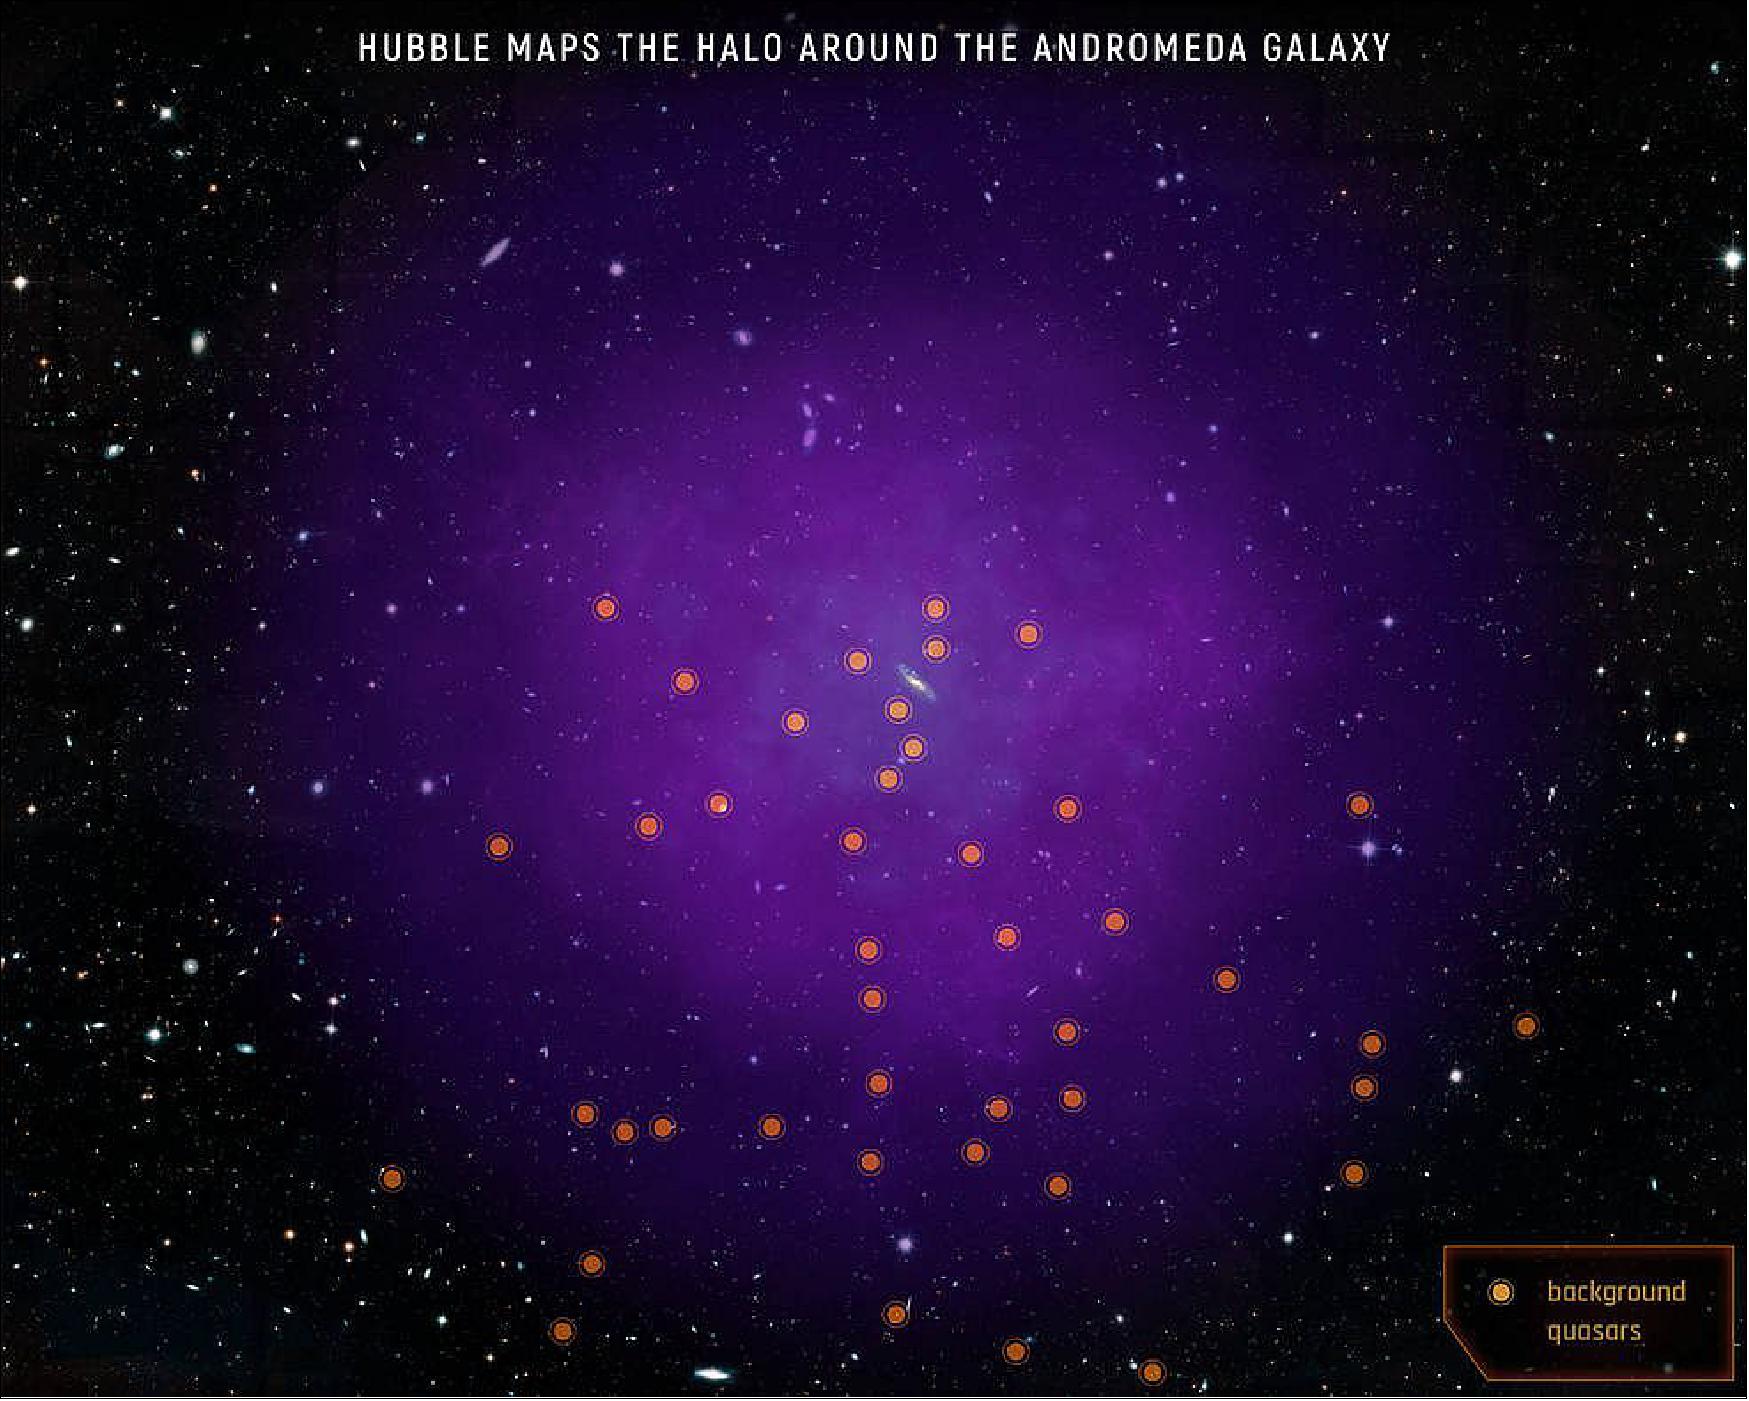 Figure 35: This illustration shows the location of the 43 quasars scientists used to probe Andromeda’s gaseous halo. These quasars—the very distant, brilliant cores of active galaxies powered by black holes—are scattered far behind the halo, allowing scientists to probe multiple regions. Looking through the immense halo at the quasars’ light, the team observed how this light is absorbed by the halo and how that absorption changes in different regions. By tracing the absorption of light coming from the background quasars, scientists are able to probe the halo’s material [image credits: NASA, ESA, and E. Wheatley (STScI)]